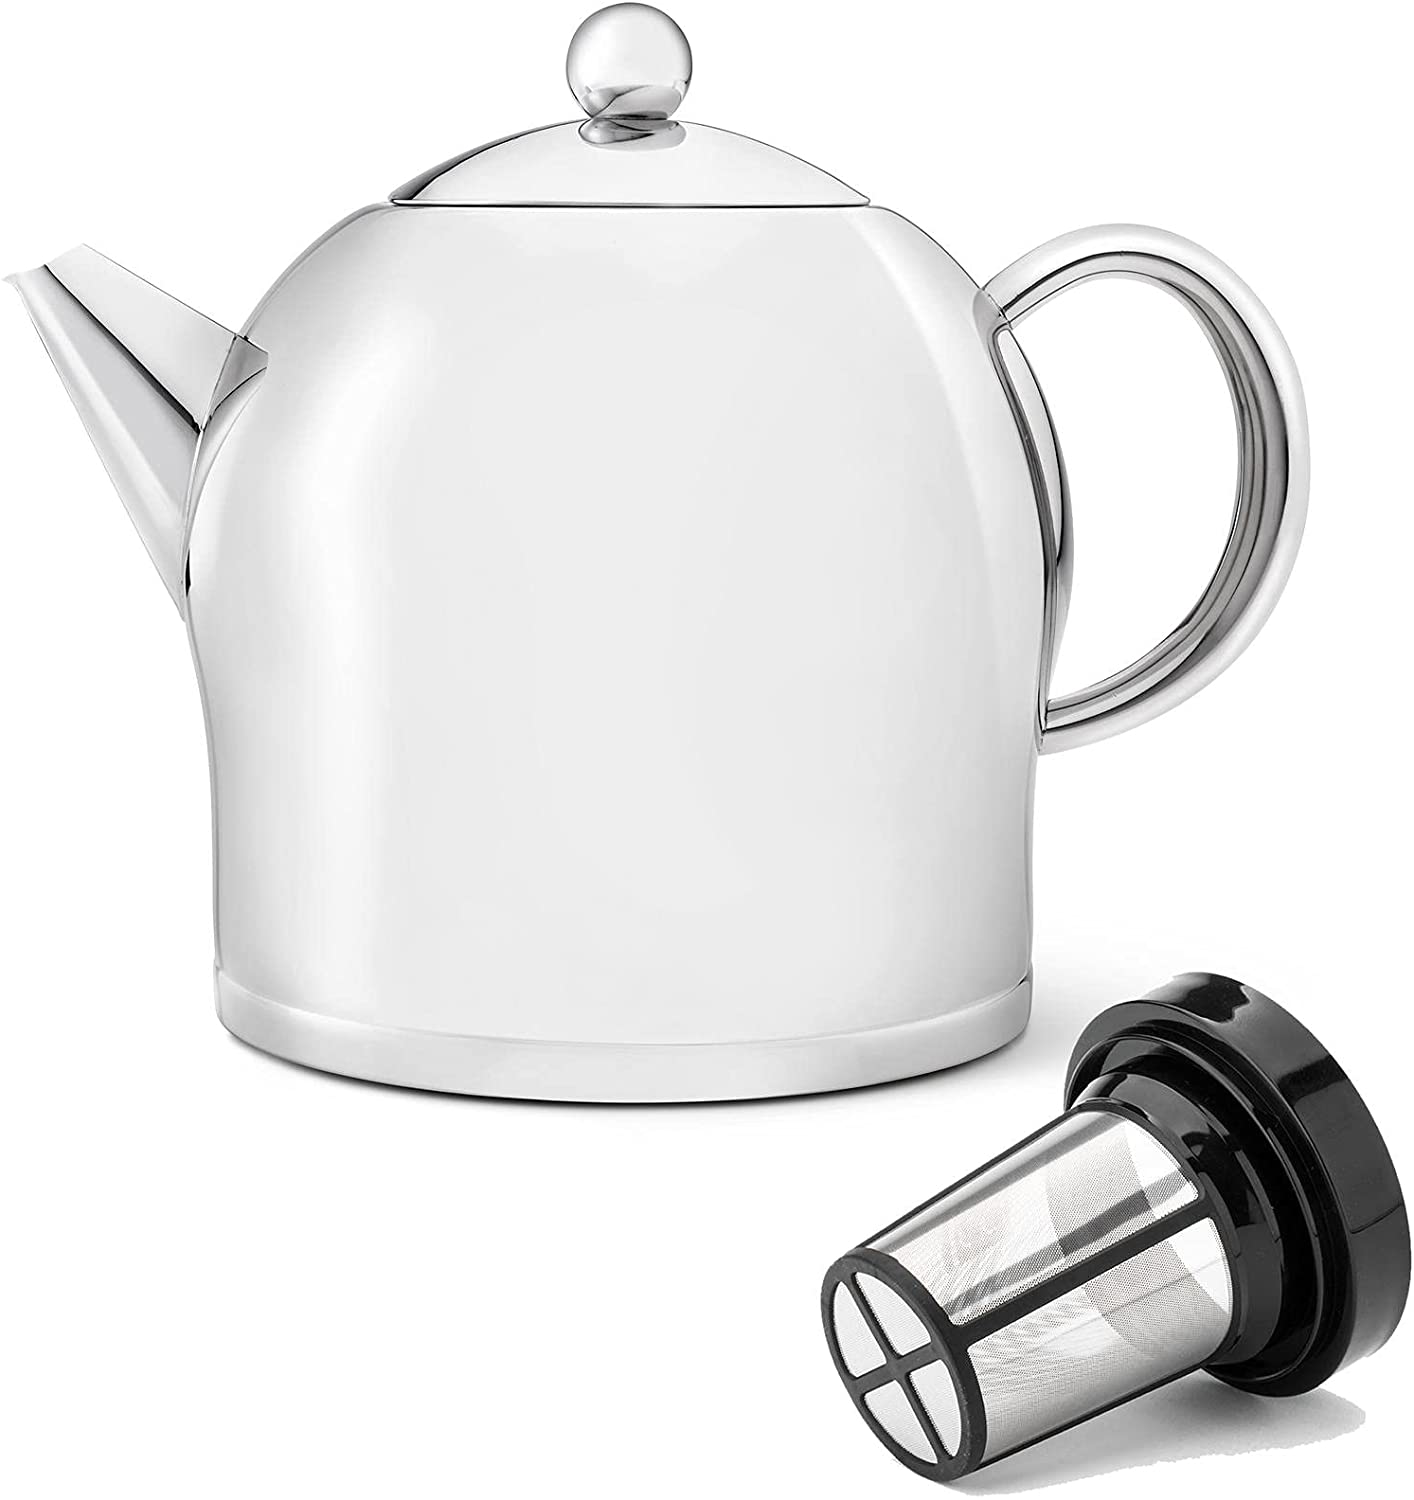 Bredemeijer Stainless Steel Teapot Set 2 Litres Shiny with Tea Filter Strainer